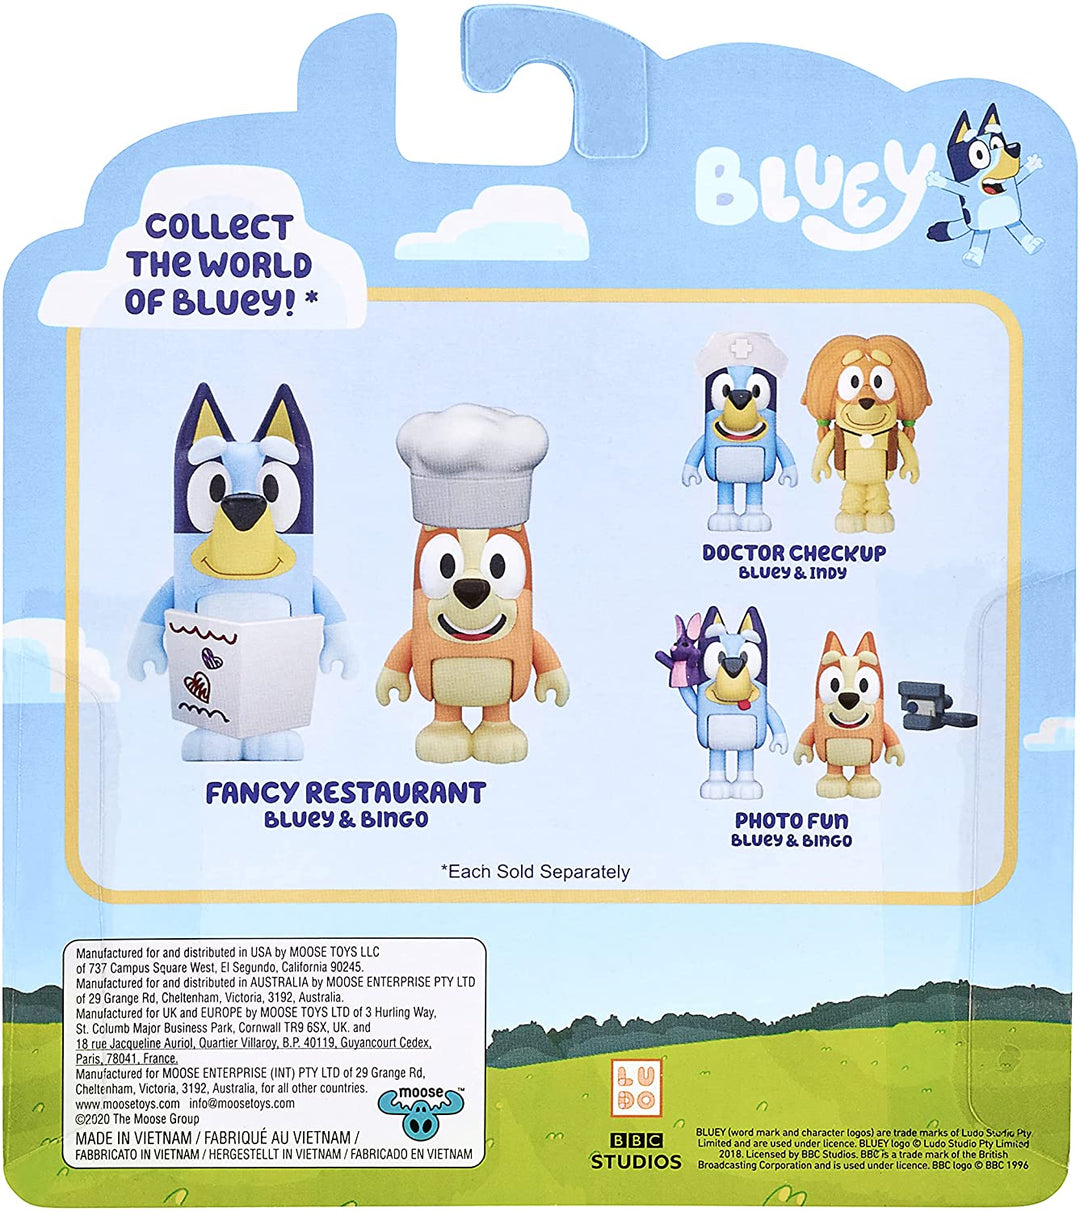 Bluey Fancy Restaurant Figure 2-Pack, 2.5 inch articulated Figures with accessor